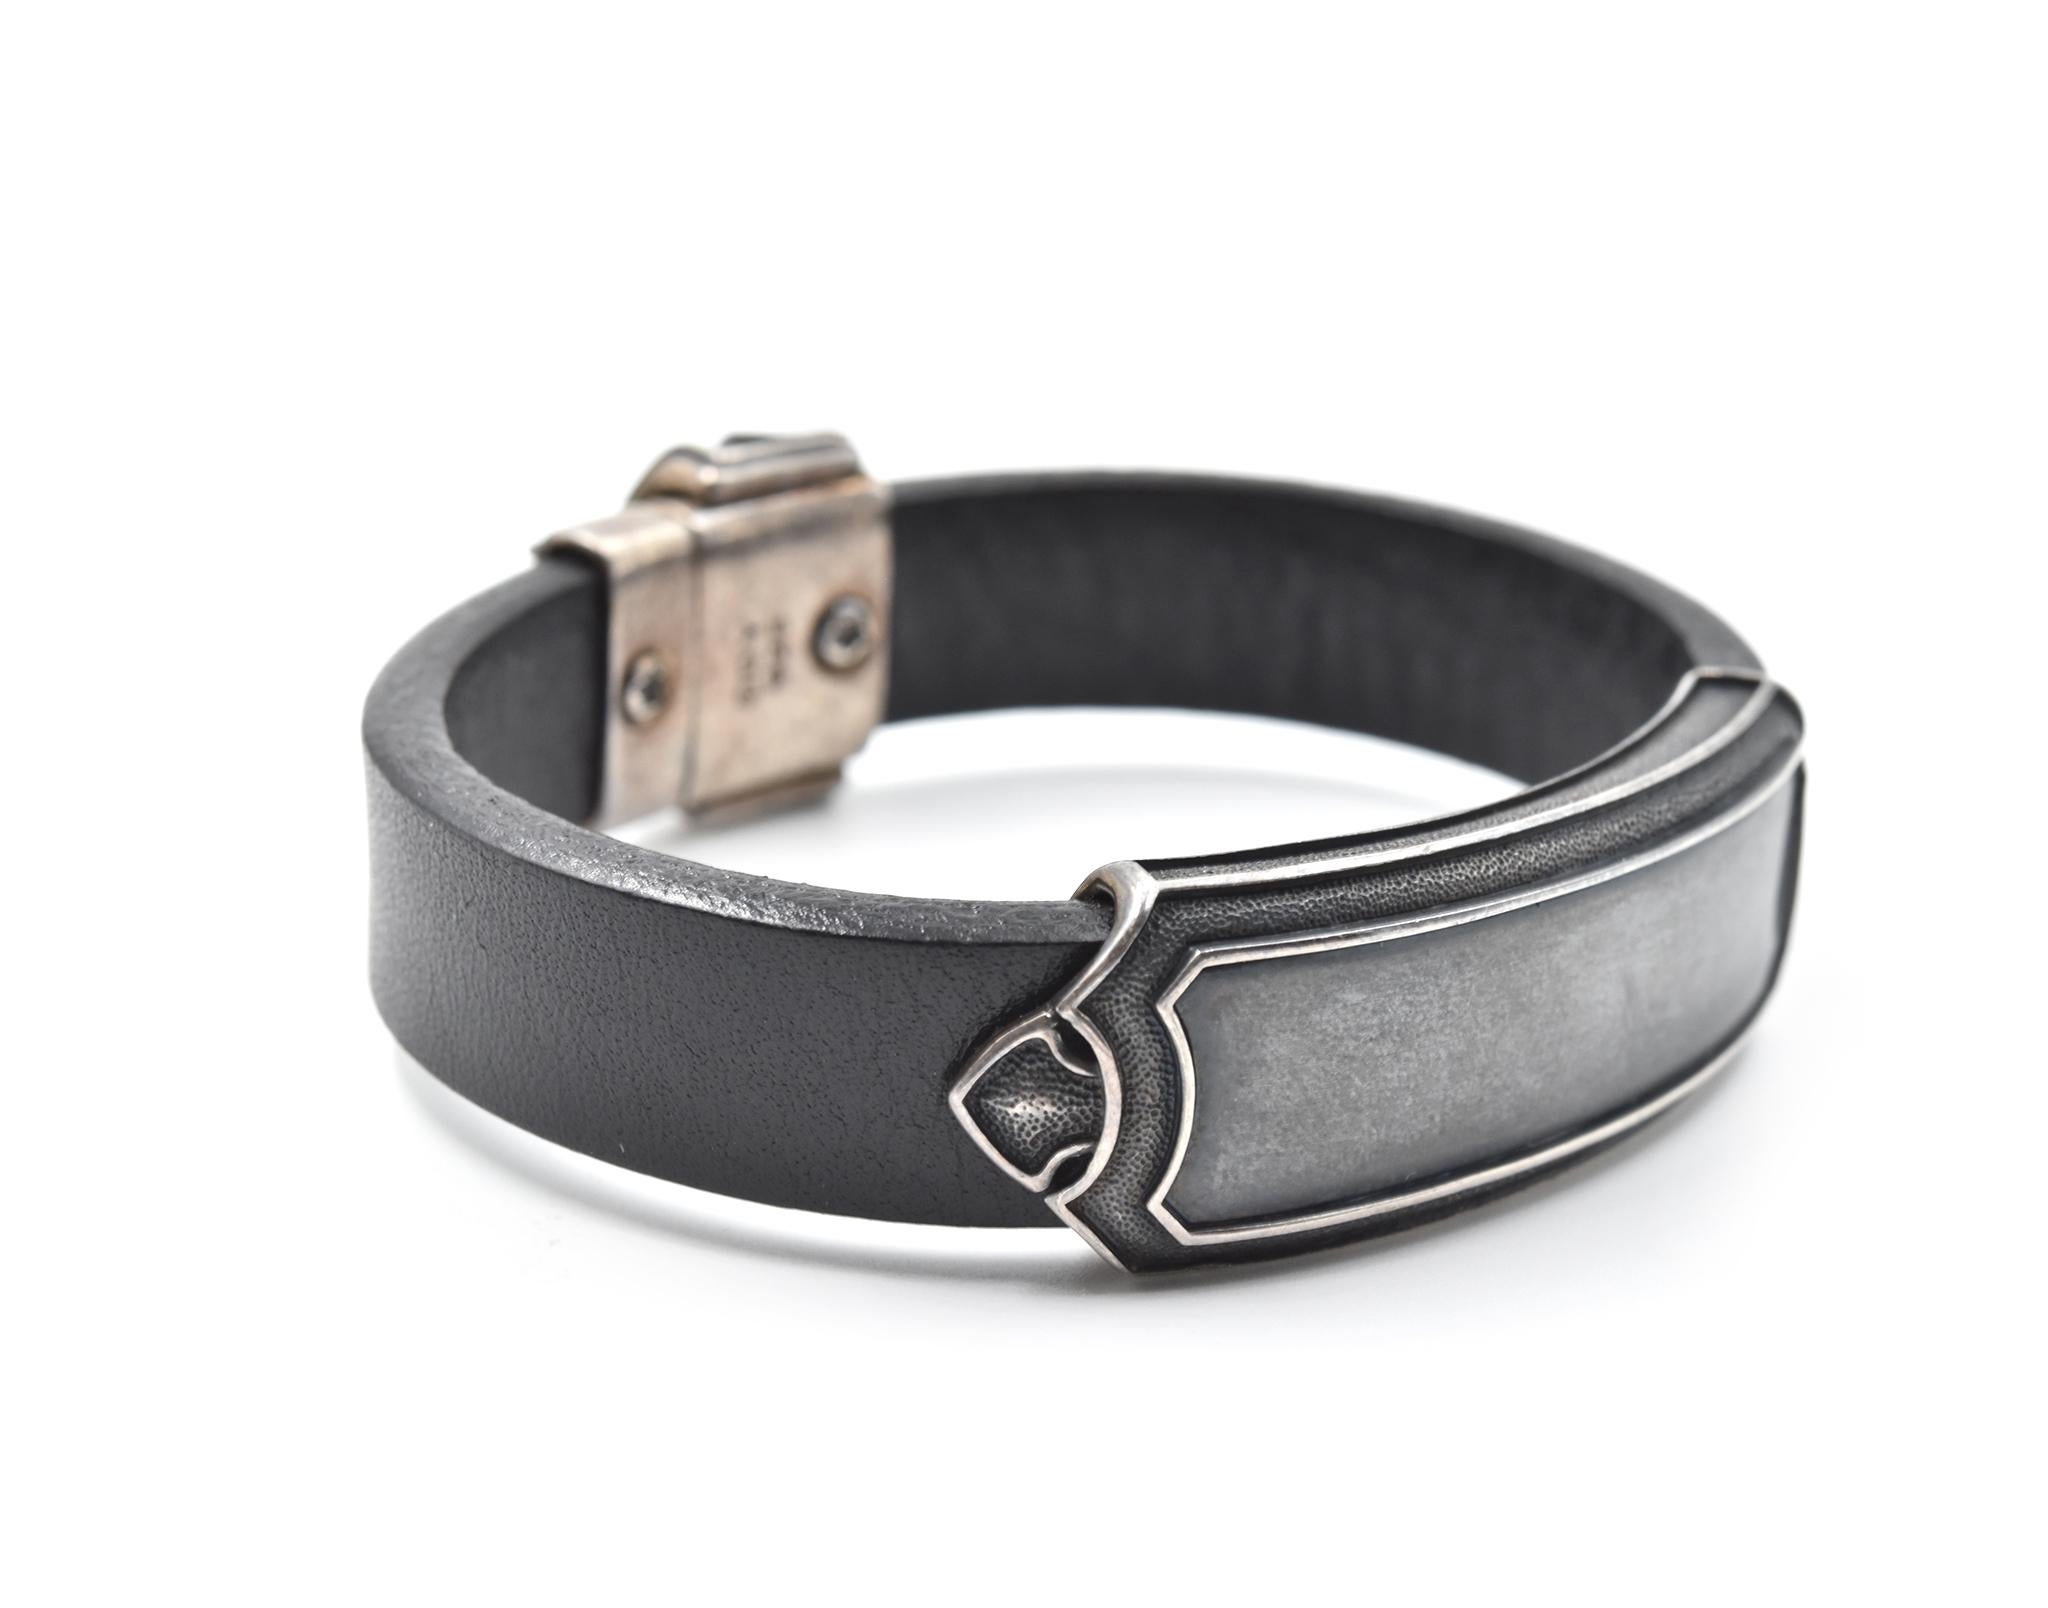 Designer: David Yurman
Material: Sterling Silver and Leather
Dimensions: Fits 8” Wrist
Width: 20mm
Weight: 49.70
